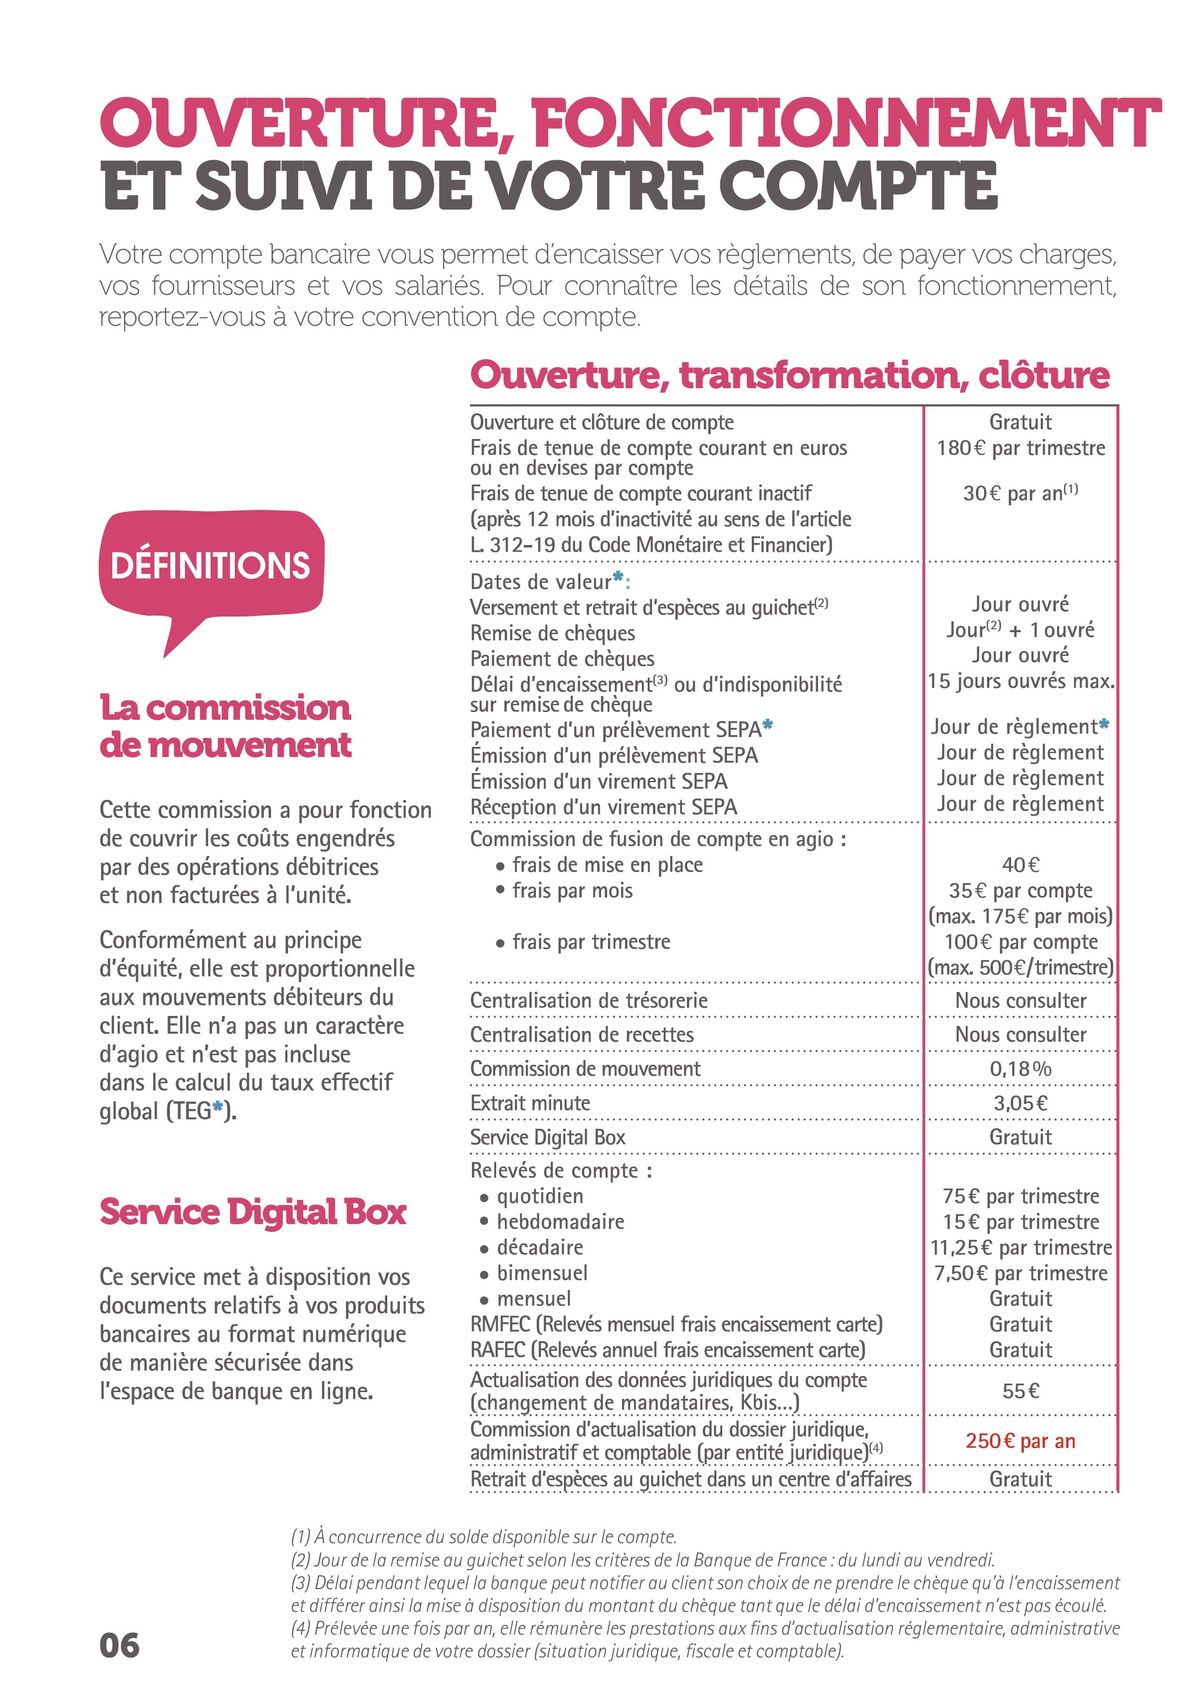 Catalogue Credit Cooperatif Guide tarifs bancaires 2023, page 00006